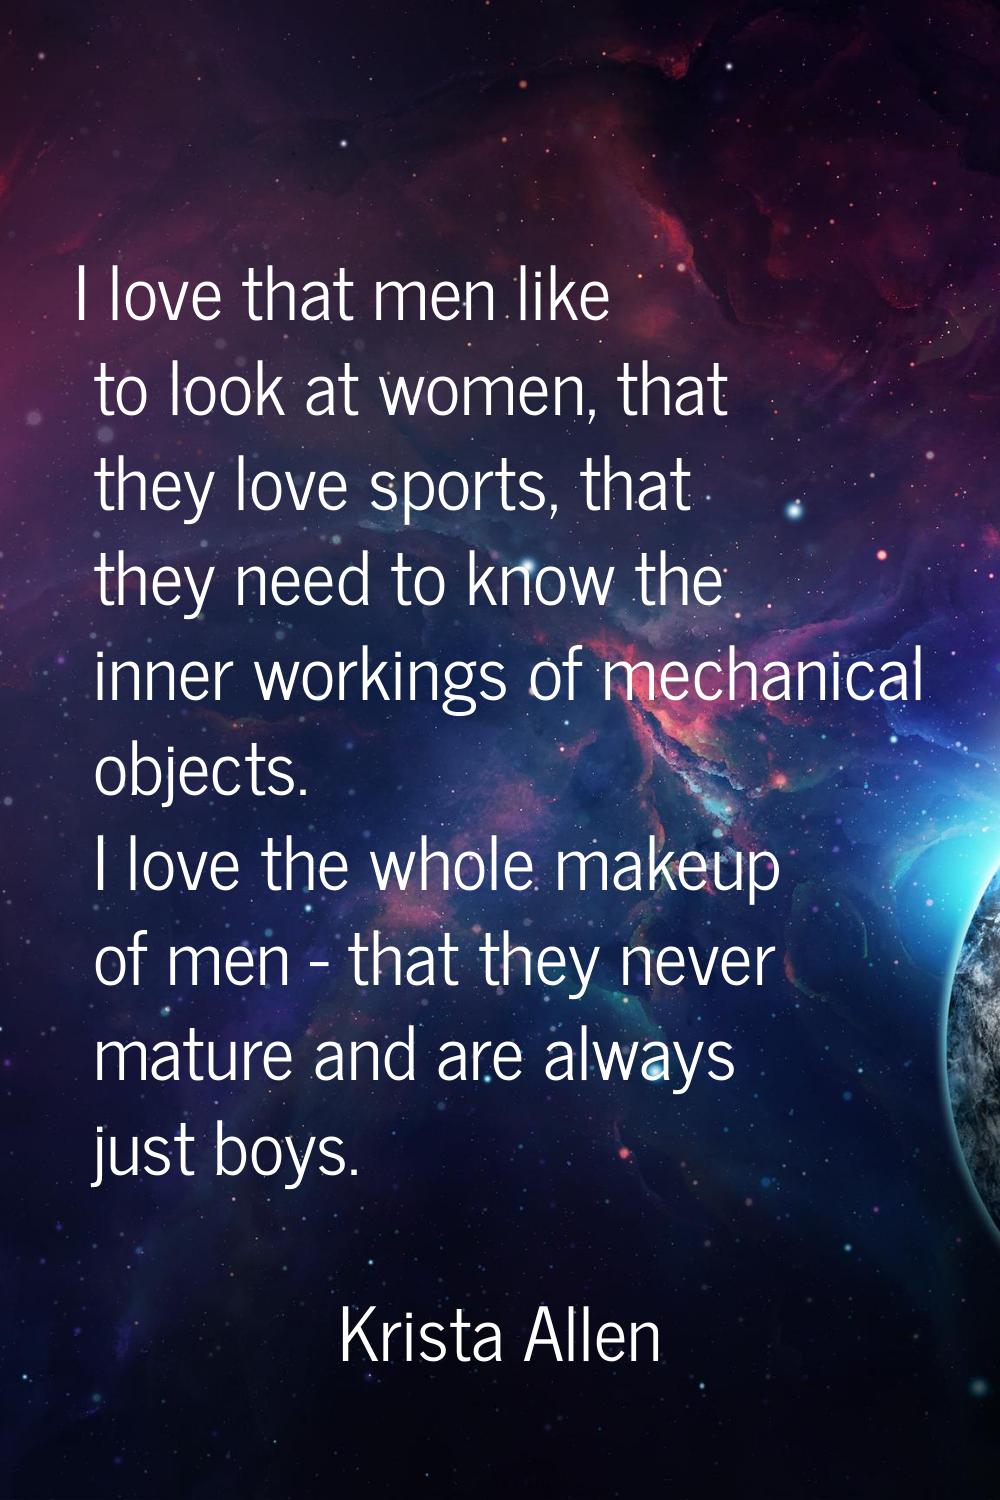 I love that men like to look at women, that they love sports, that they need to know the inner work